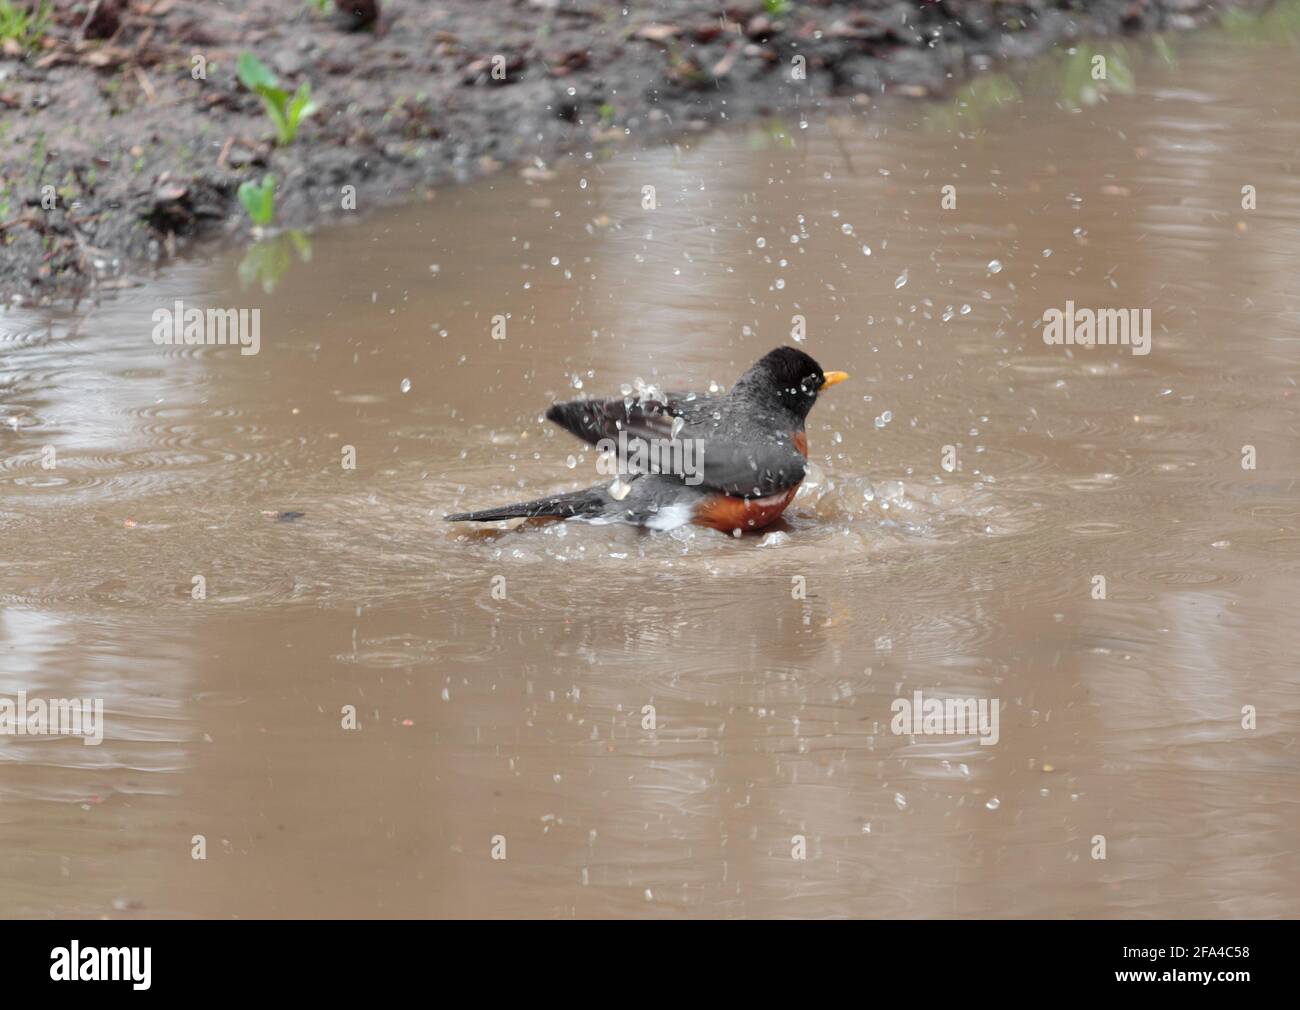 adult american robin having a bath, splashing and playing in a brown muddy puddle next to a mudbank; water flies as he shakes his feathers Stock Photo